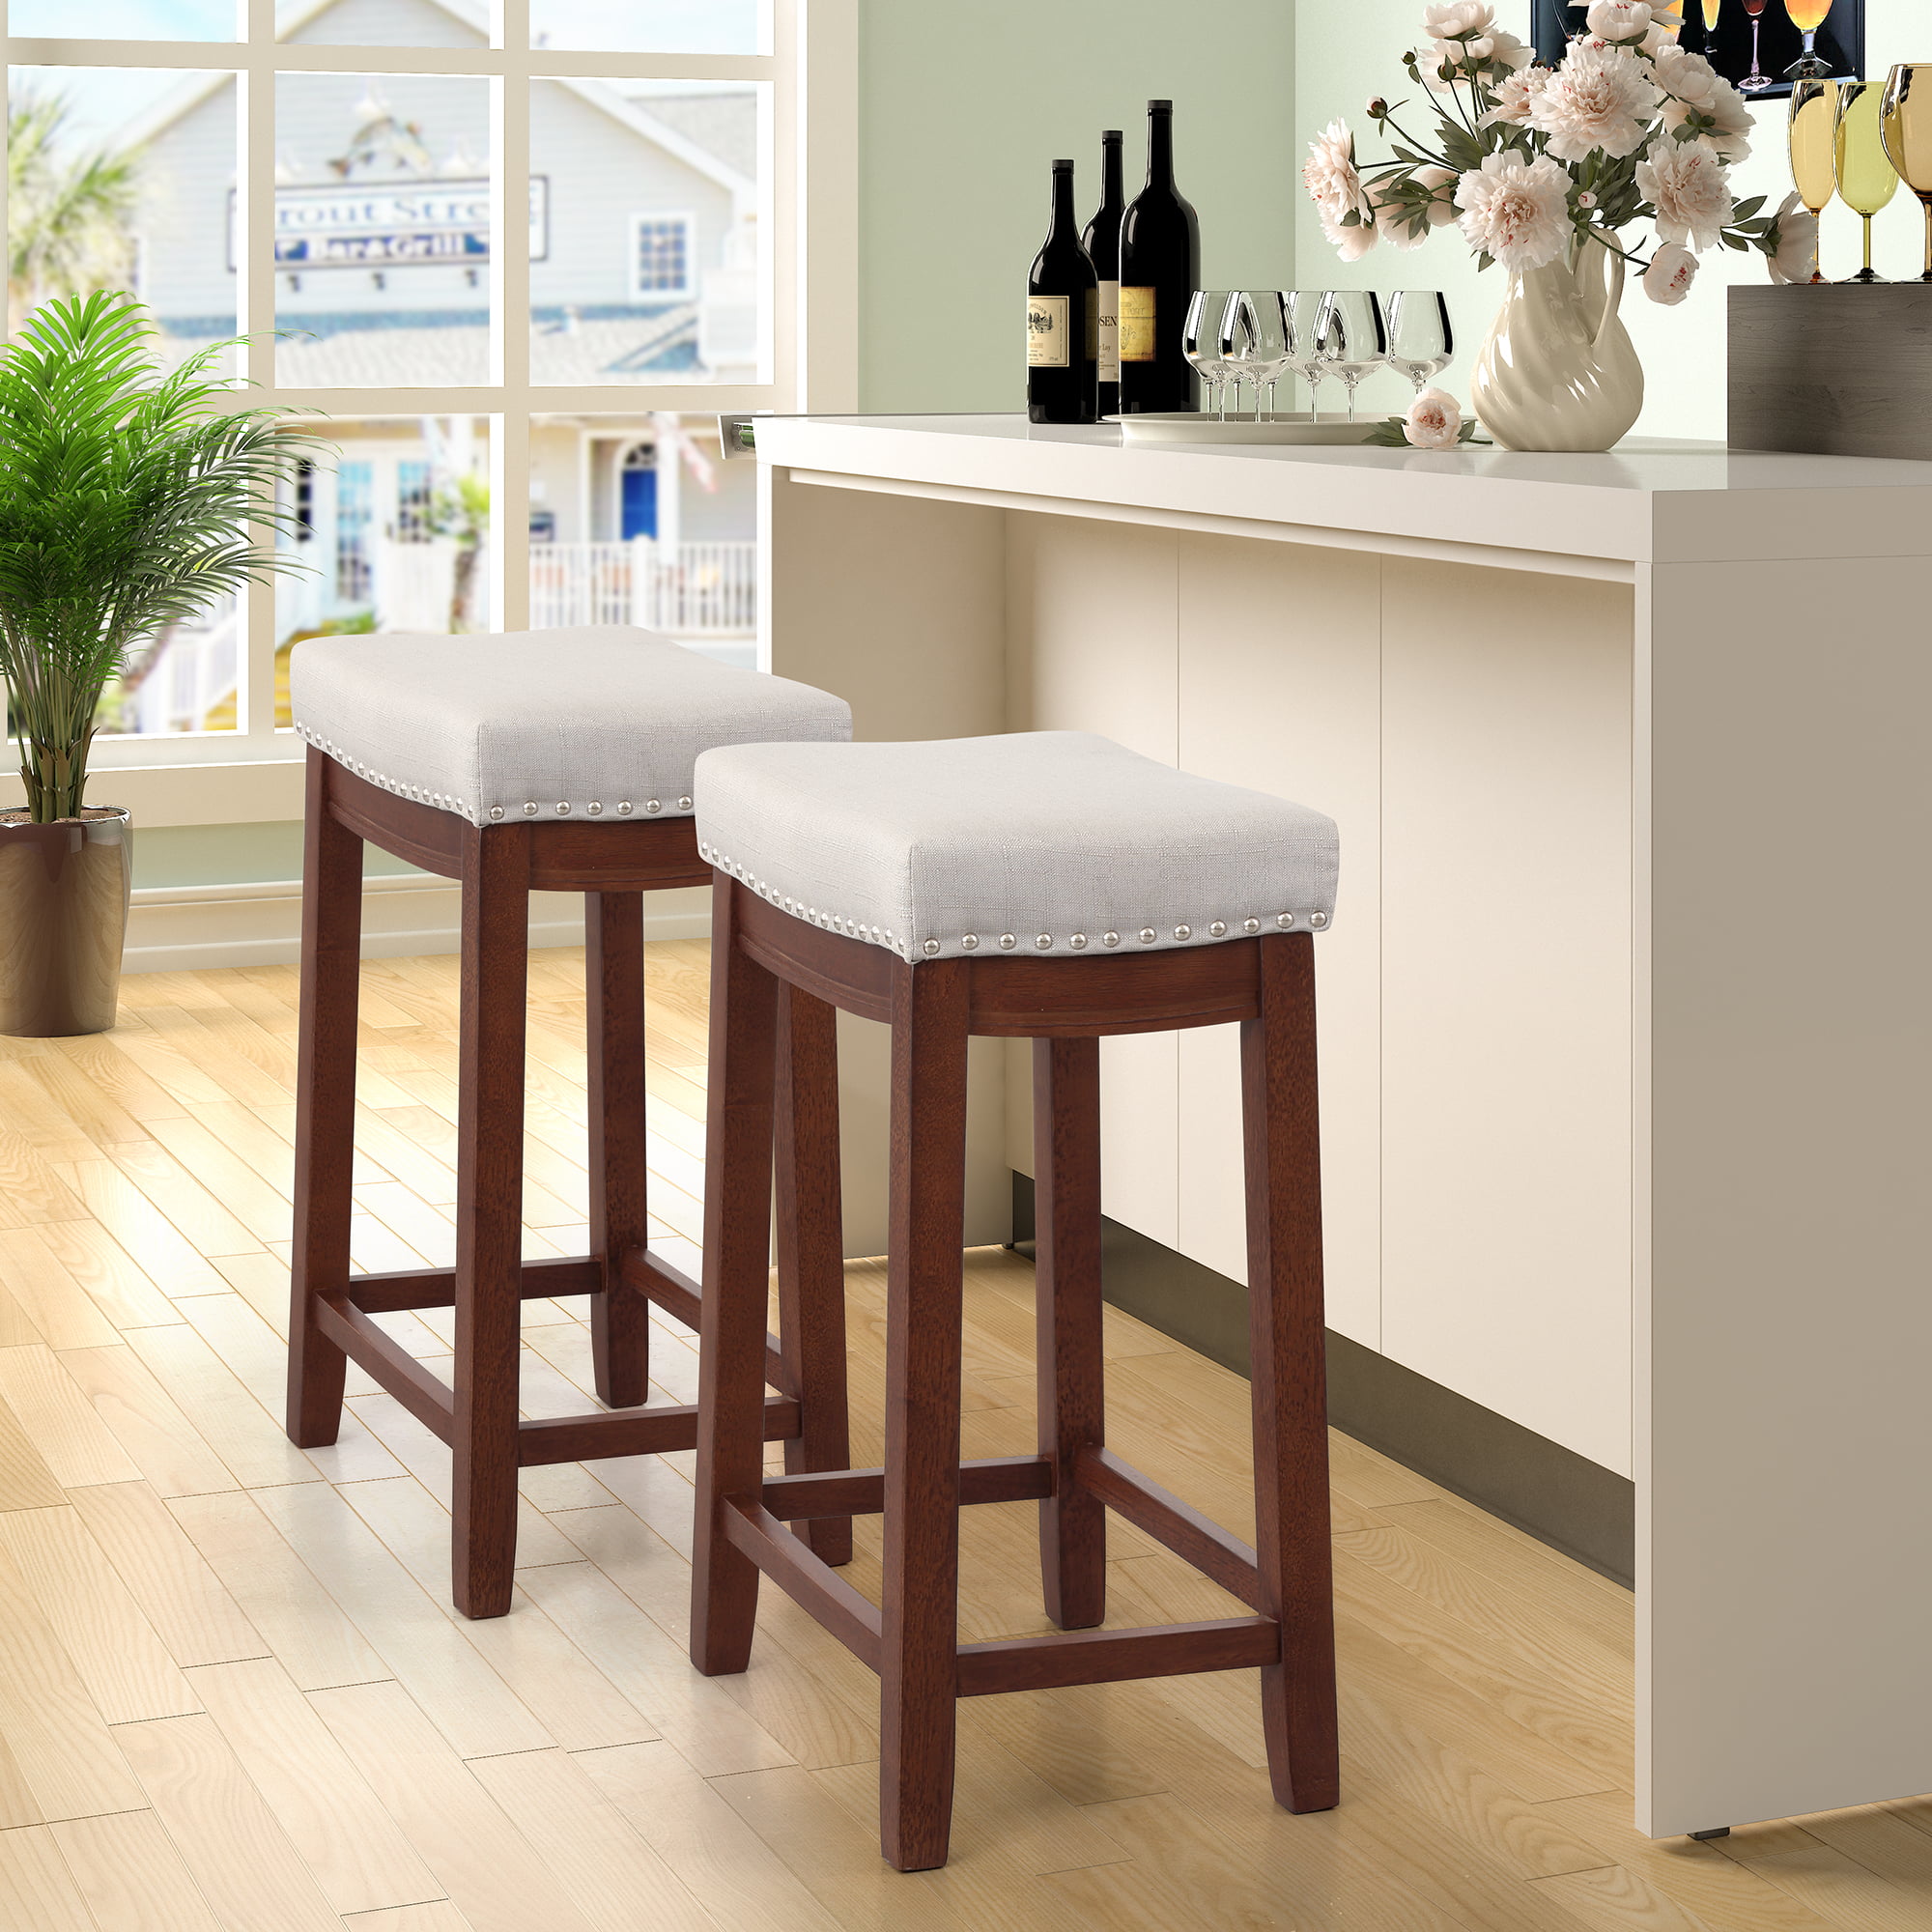 Small Bar Stool Table And Chairs - Tribesigns Bar Table Set With 2 ...